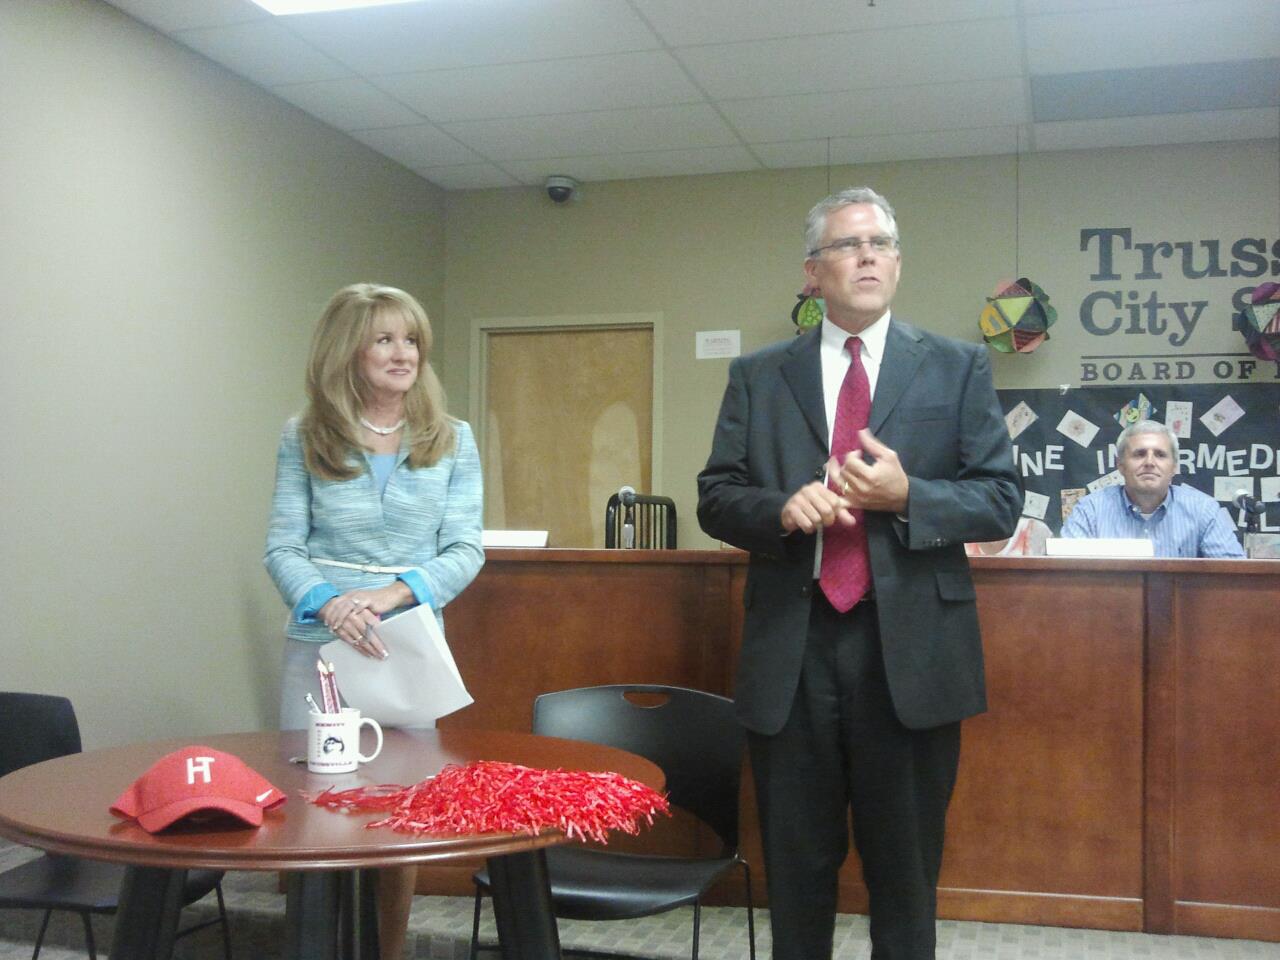 Trussville City Schools Board of Education names Dr. Pattie Neill as Superintendent